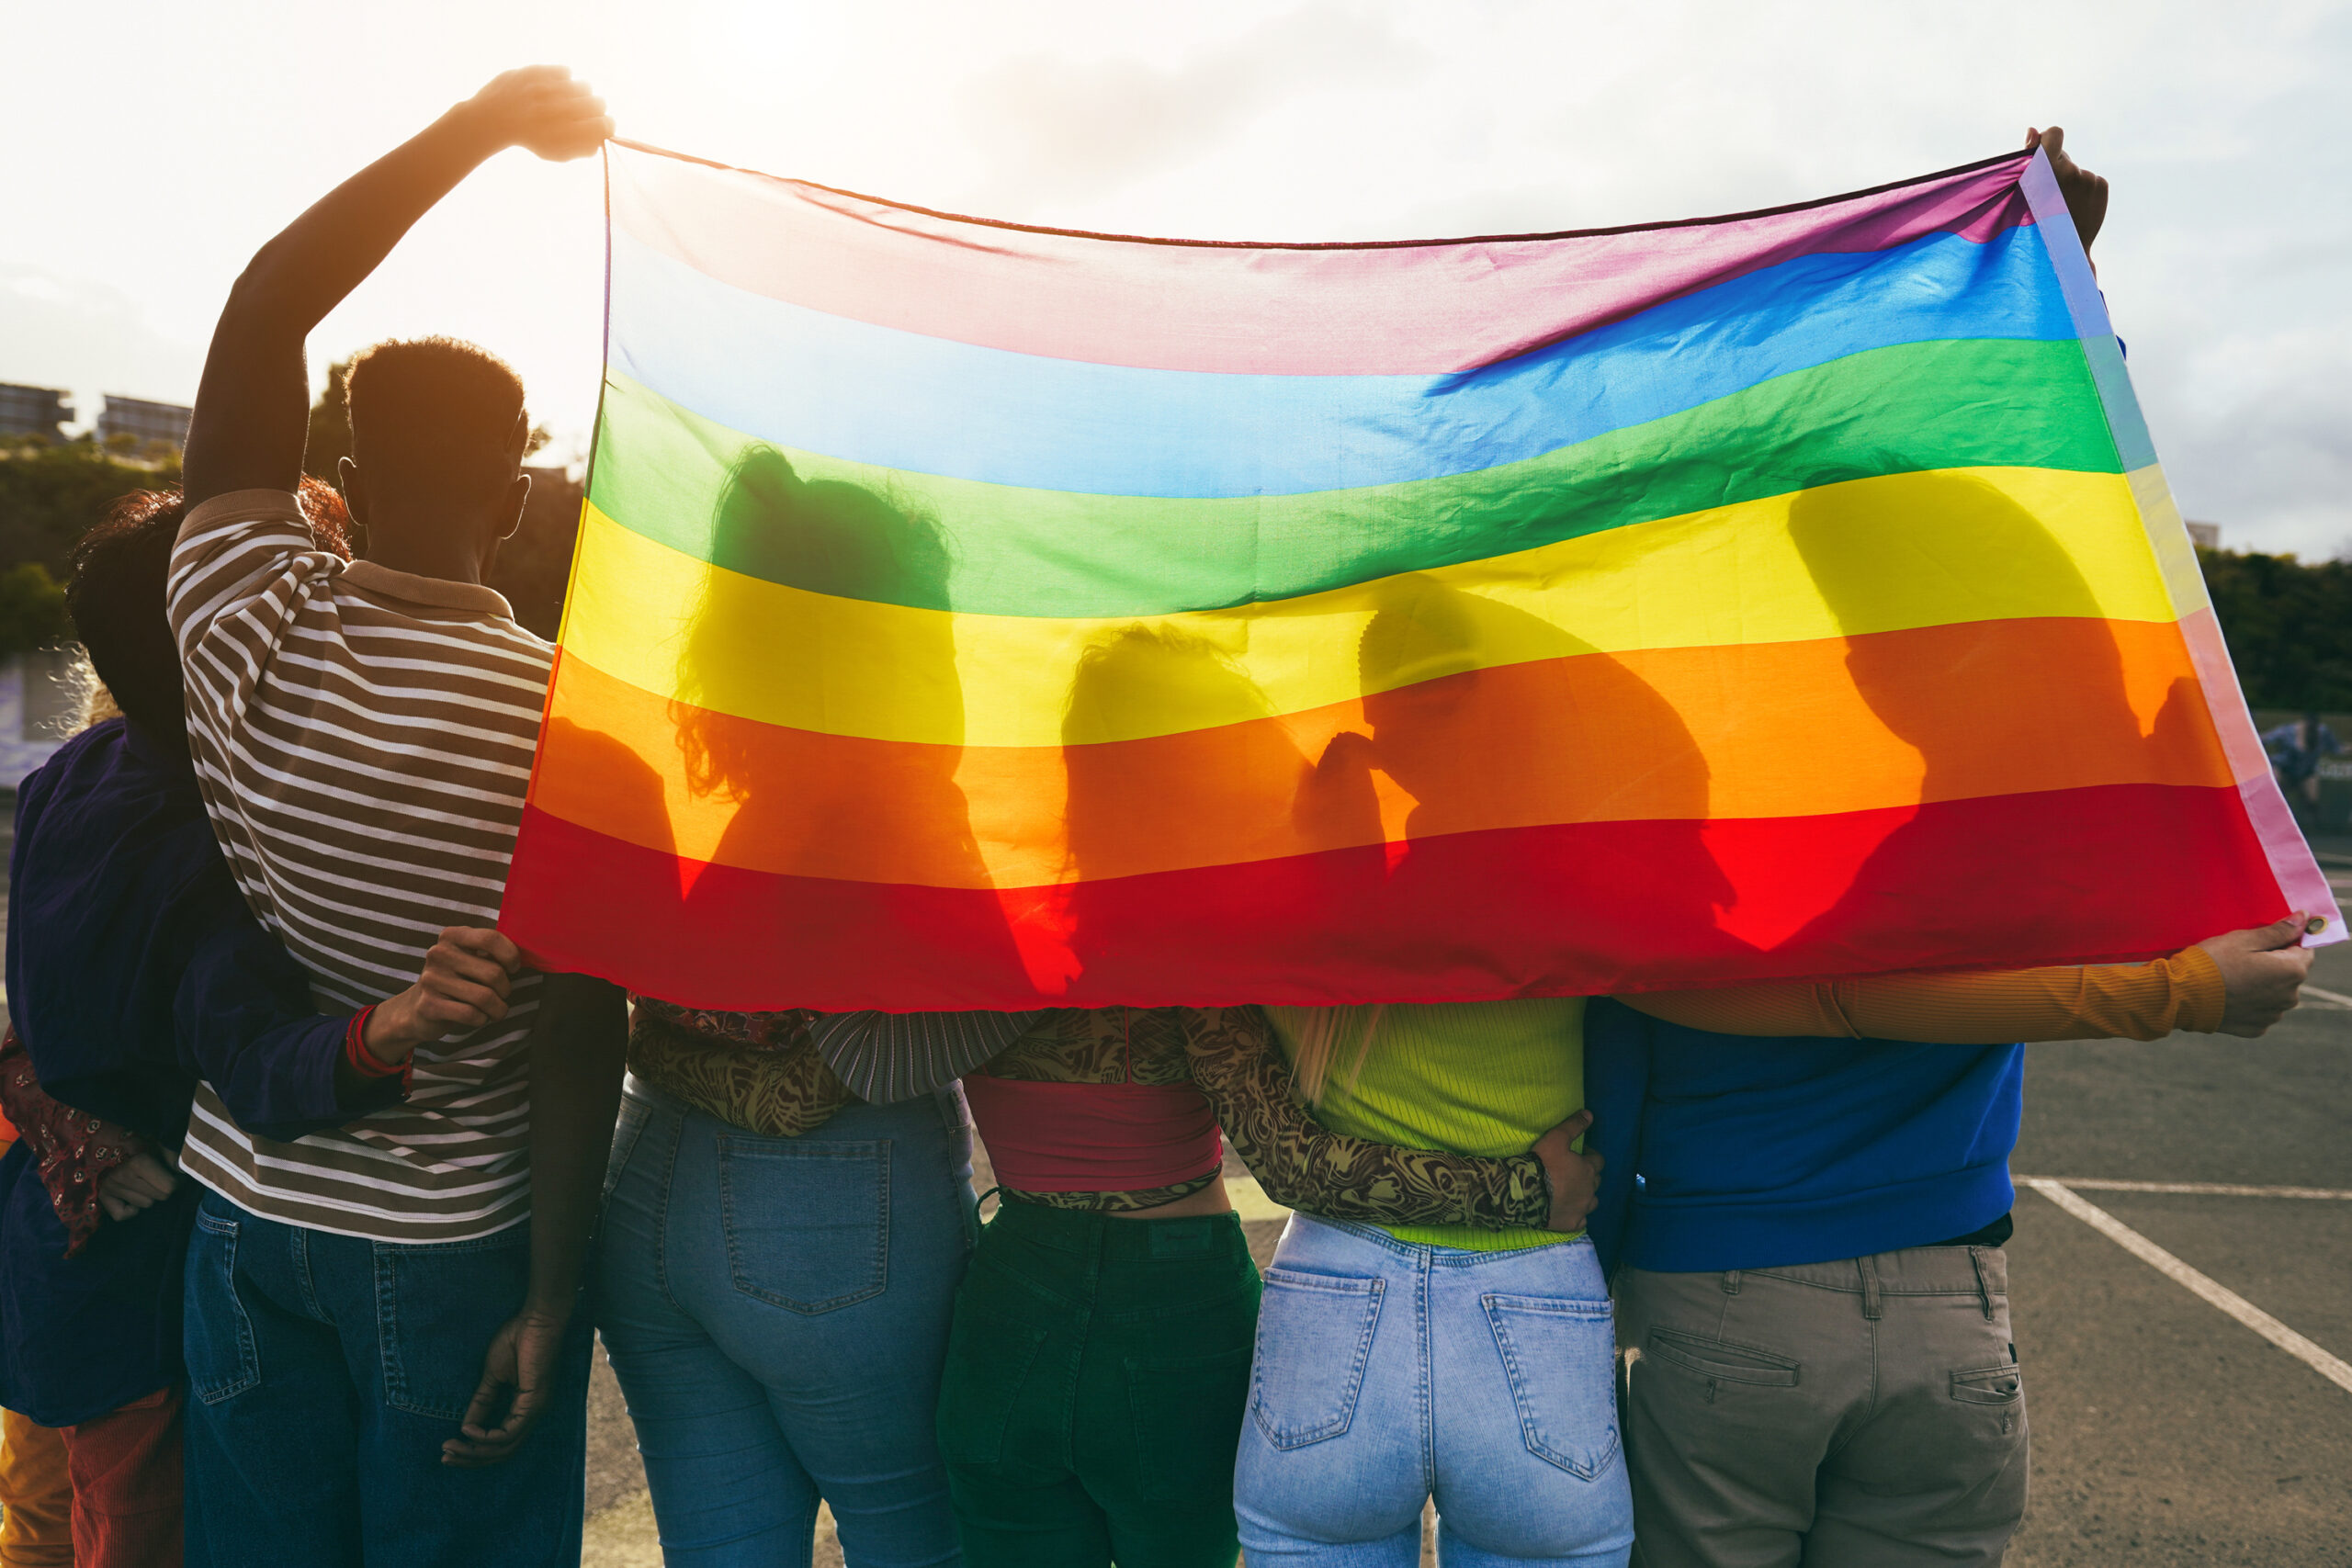 People hold a rainbow flag up to the sunlight, their silhouettes can be seen behind it.